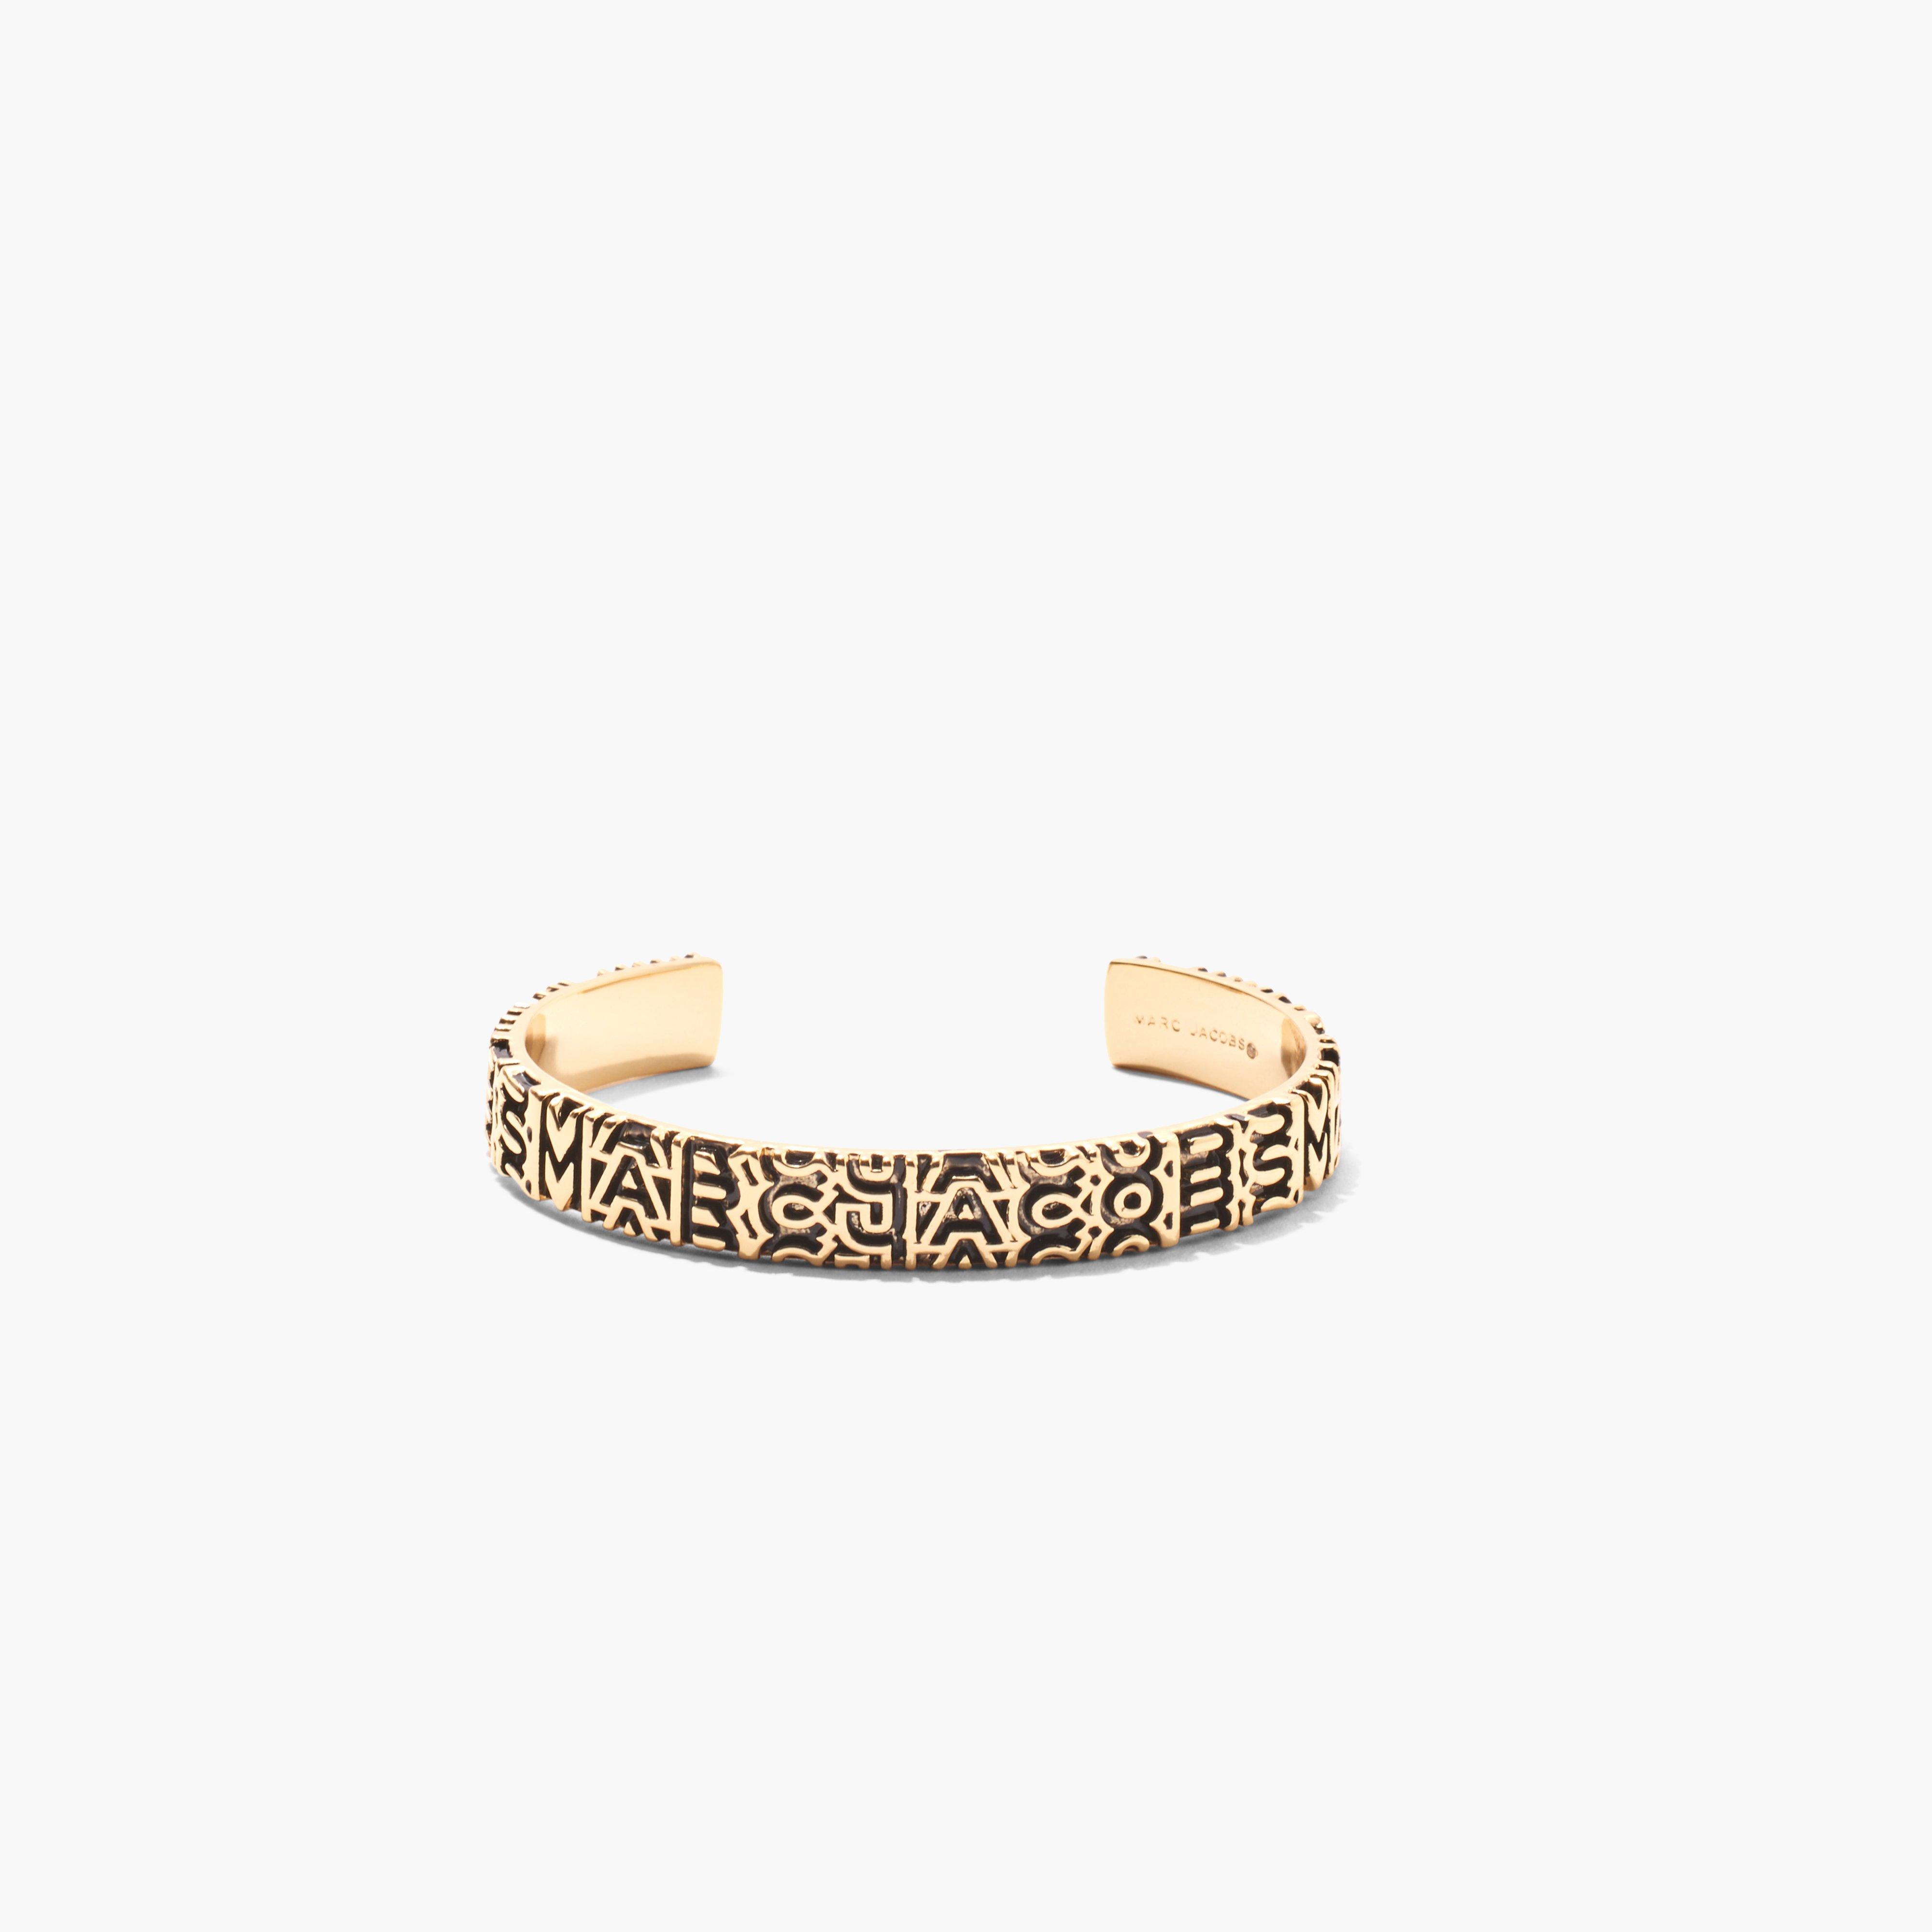 Marc by Marc jacobs The Monogram Engraved Bracelet,AGED GOLD